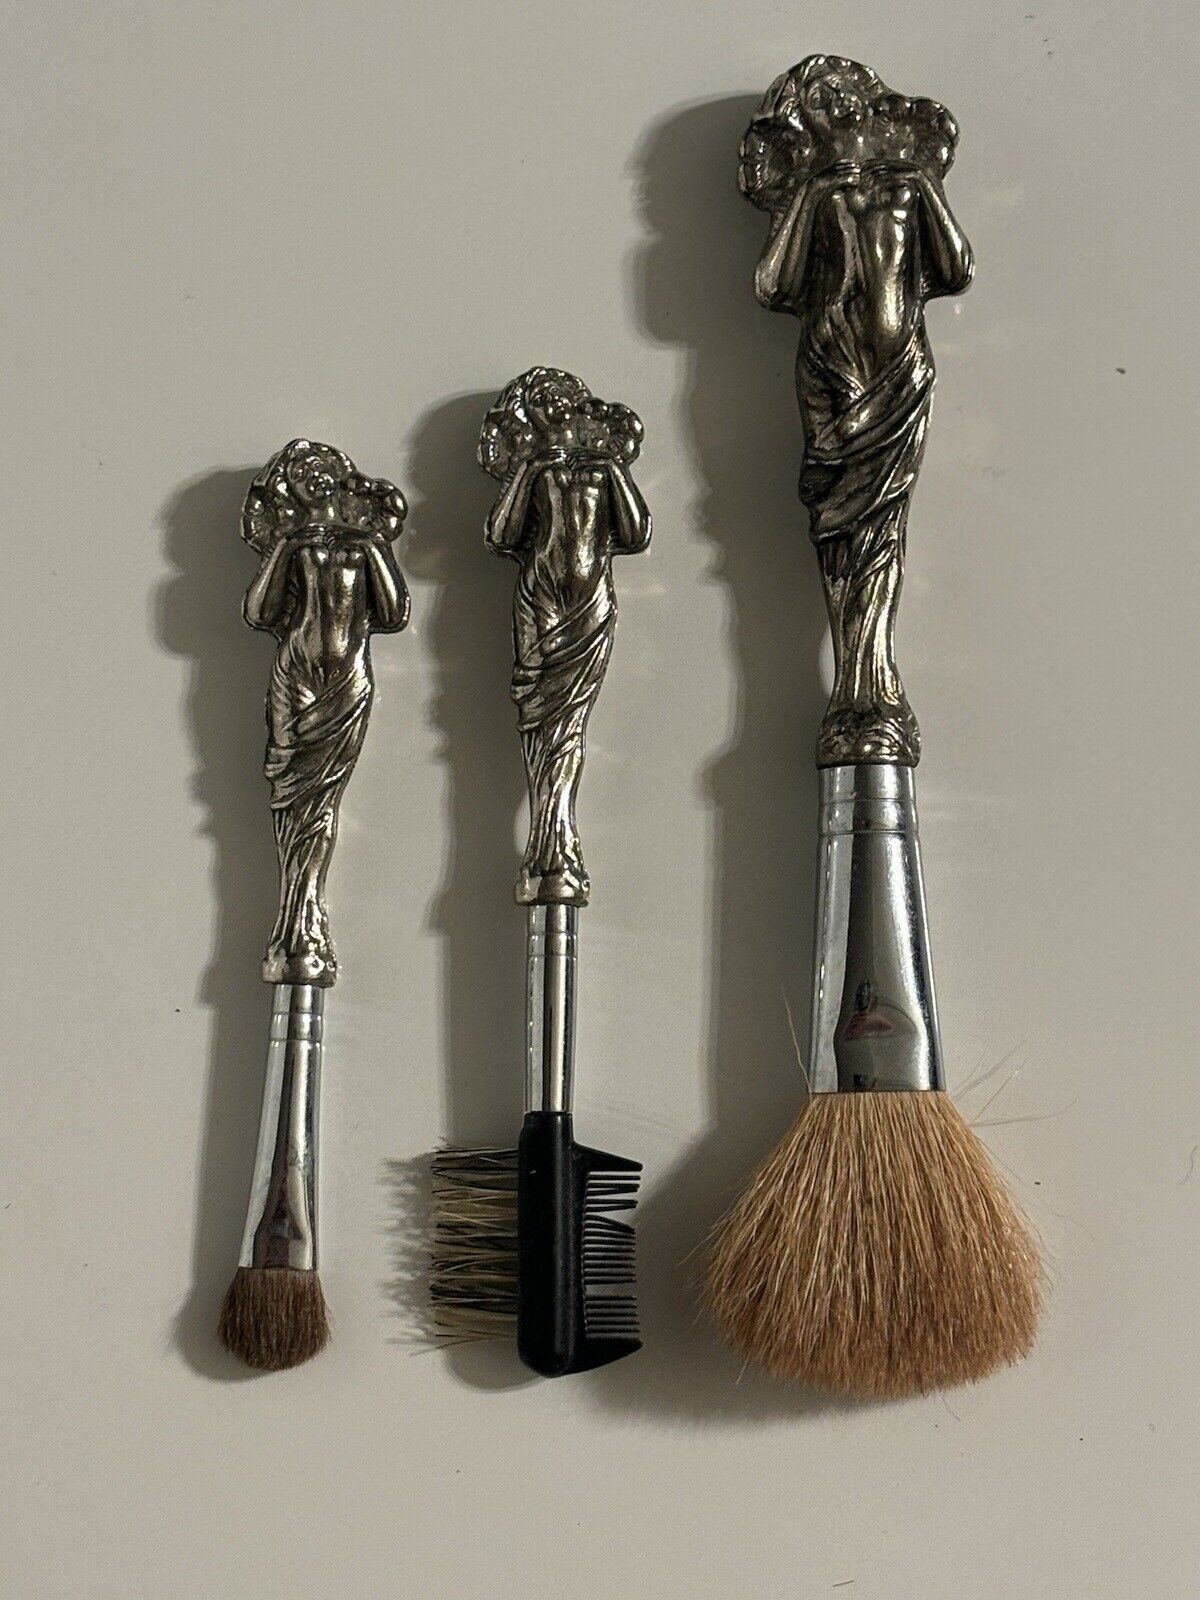 Vintage Antique Art Nouveau Cosmetic Makeup Brushes Tools Woman Vanity Lovely 